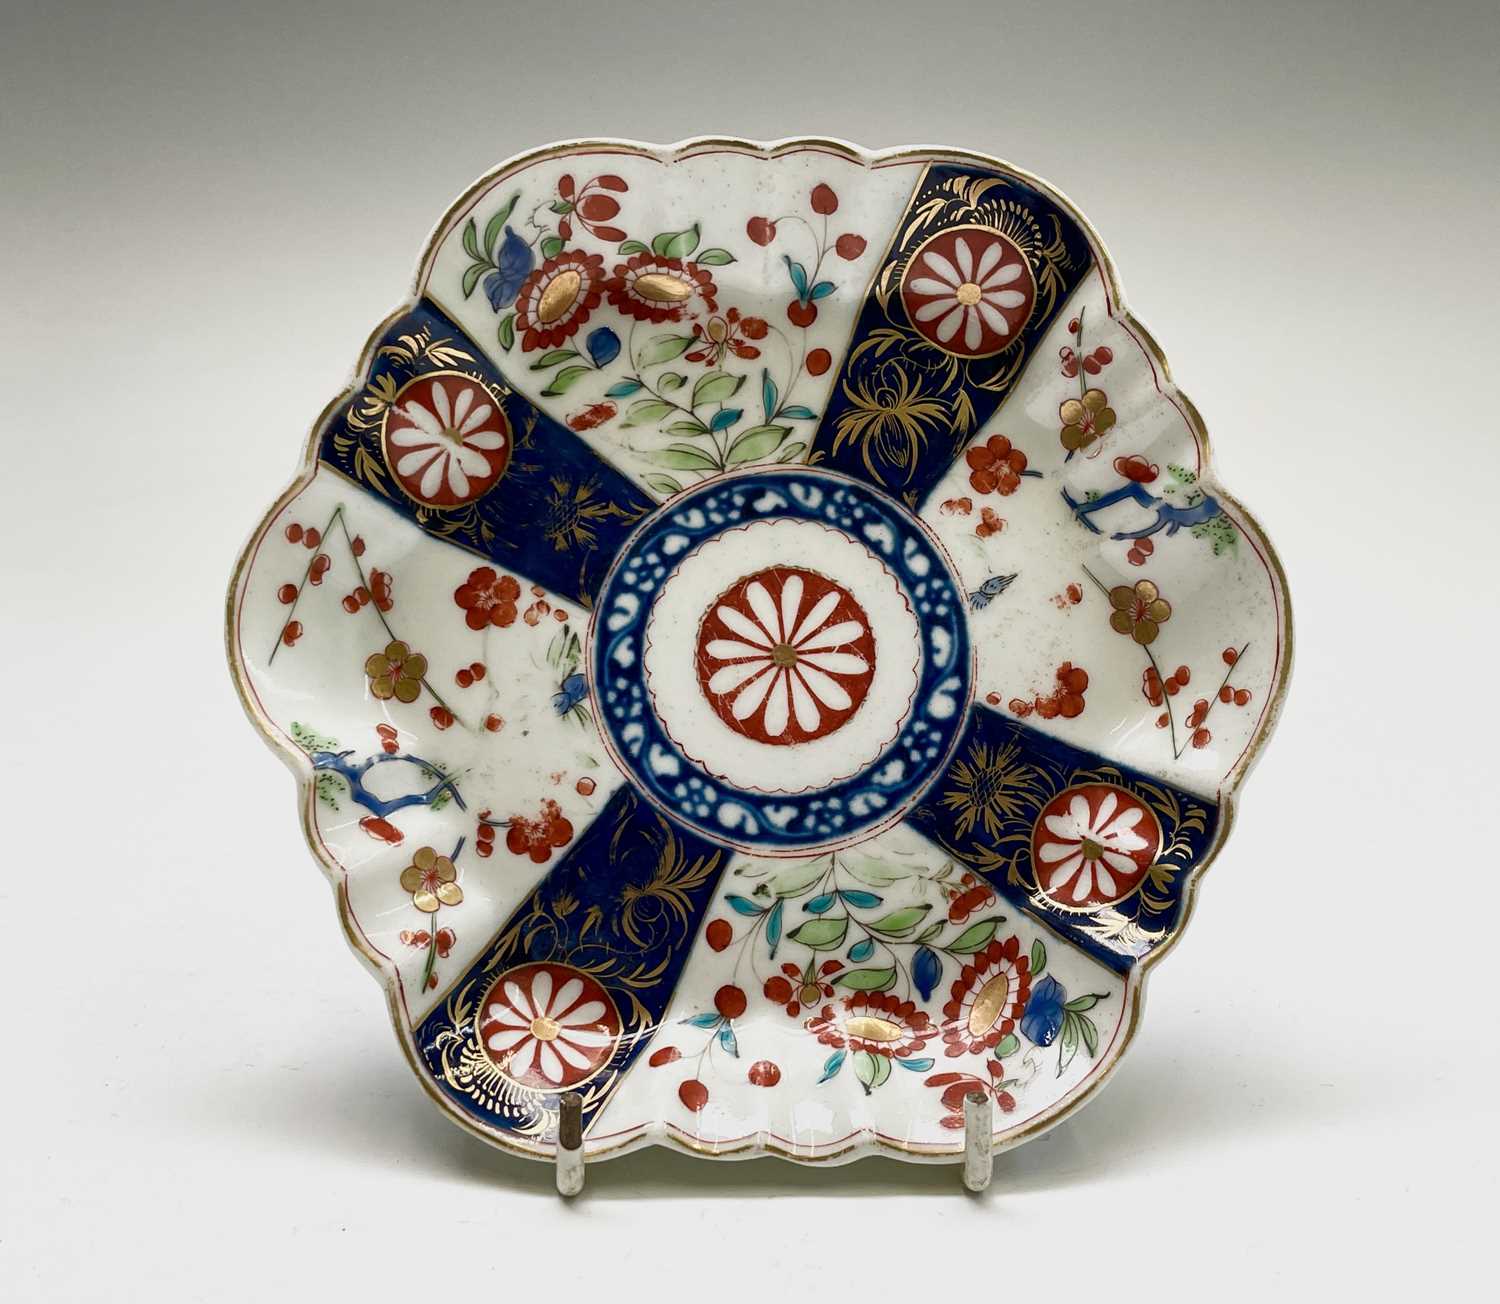 A Worcester Queens pattern porcelain hexagonal tray, 19th century, in the Chinese Imari style, the